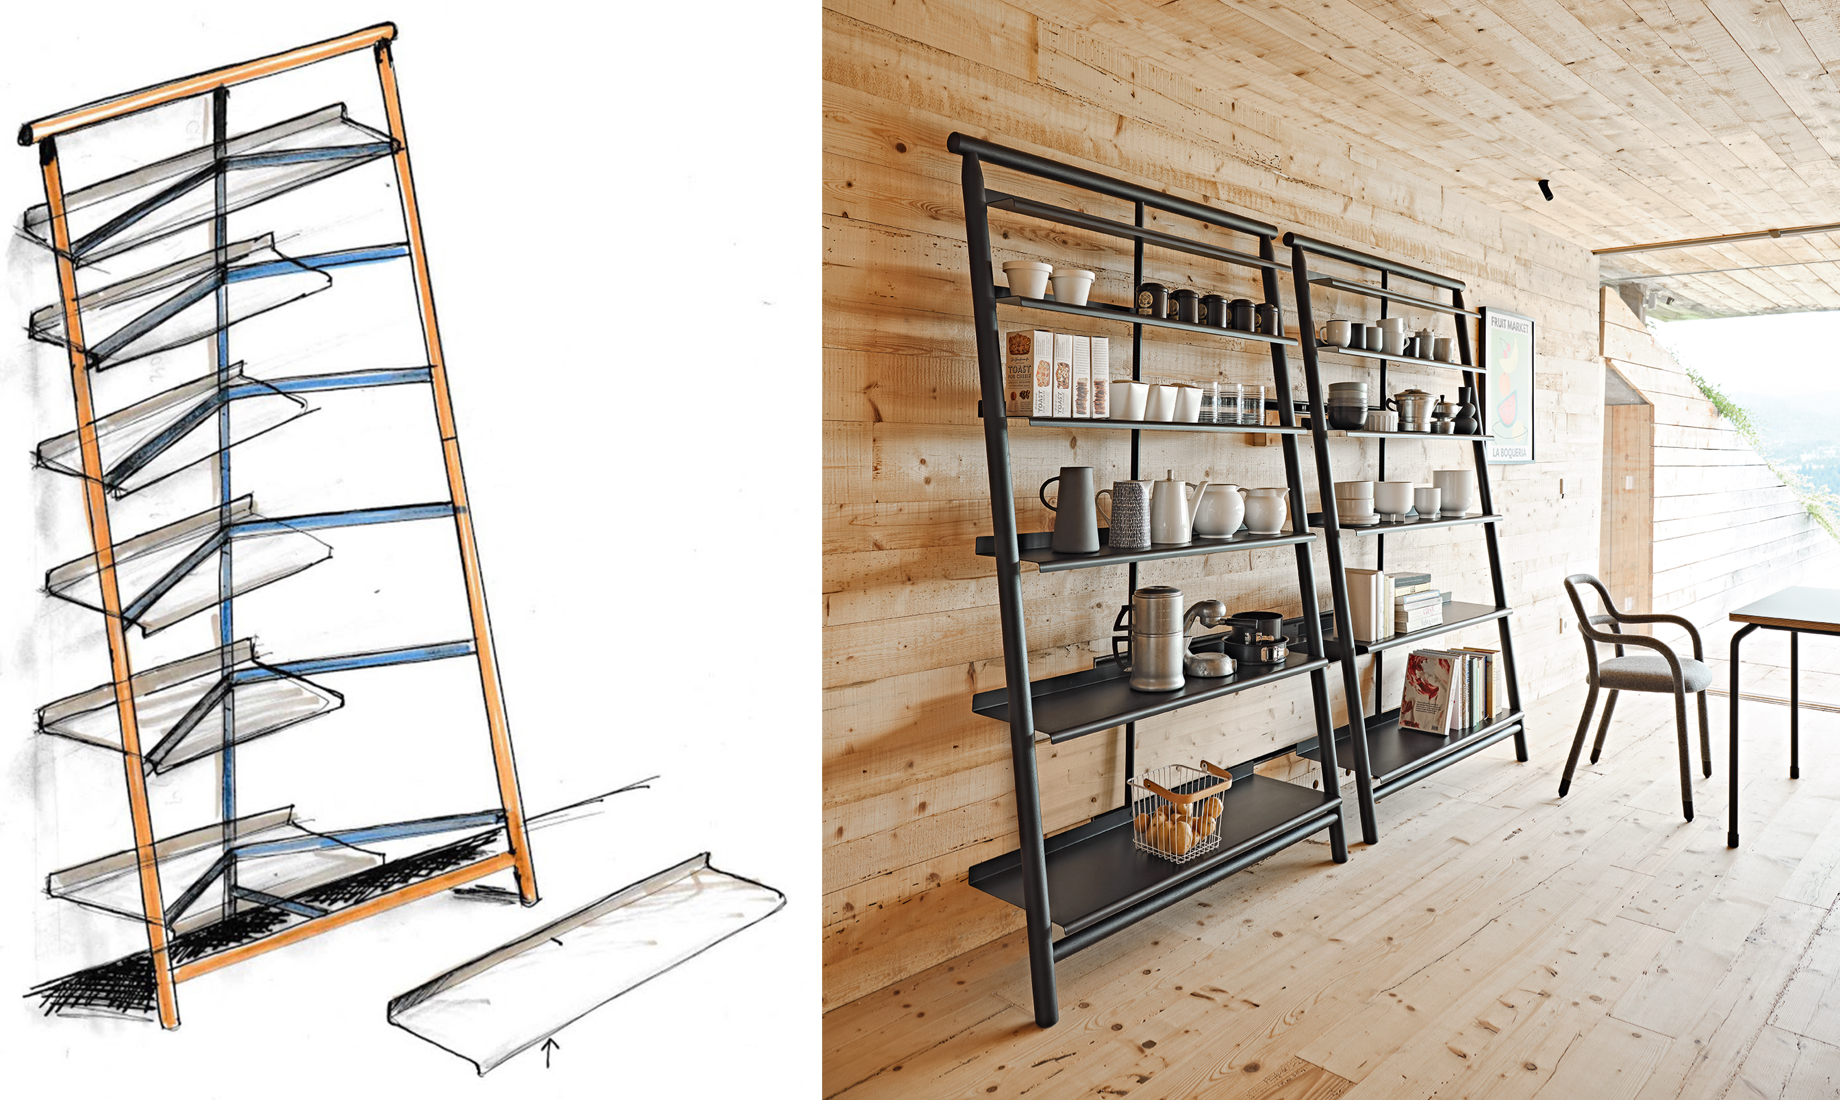 On the left a sketch of the Suite bookcase, on the right the Suite bookcase, design AtelierNanni.